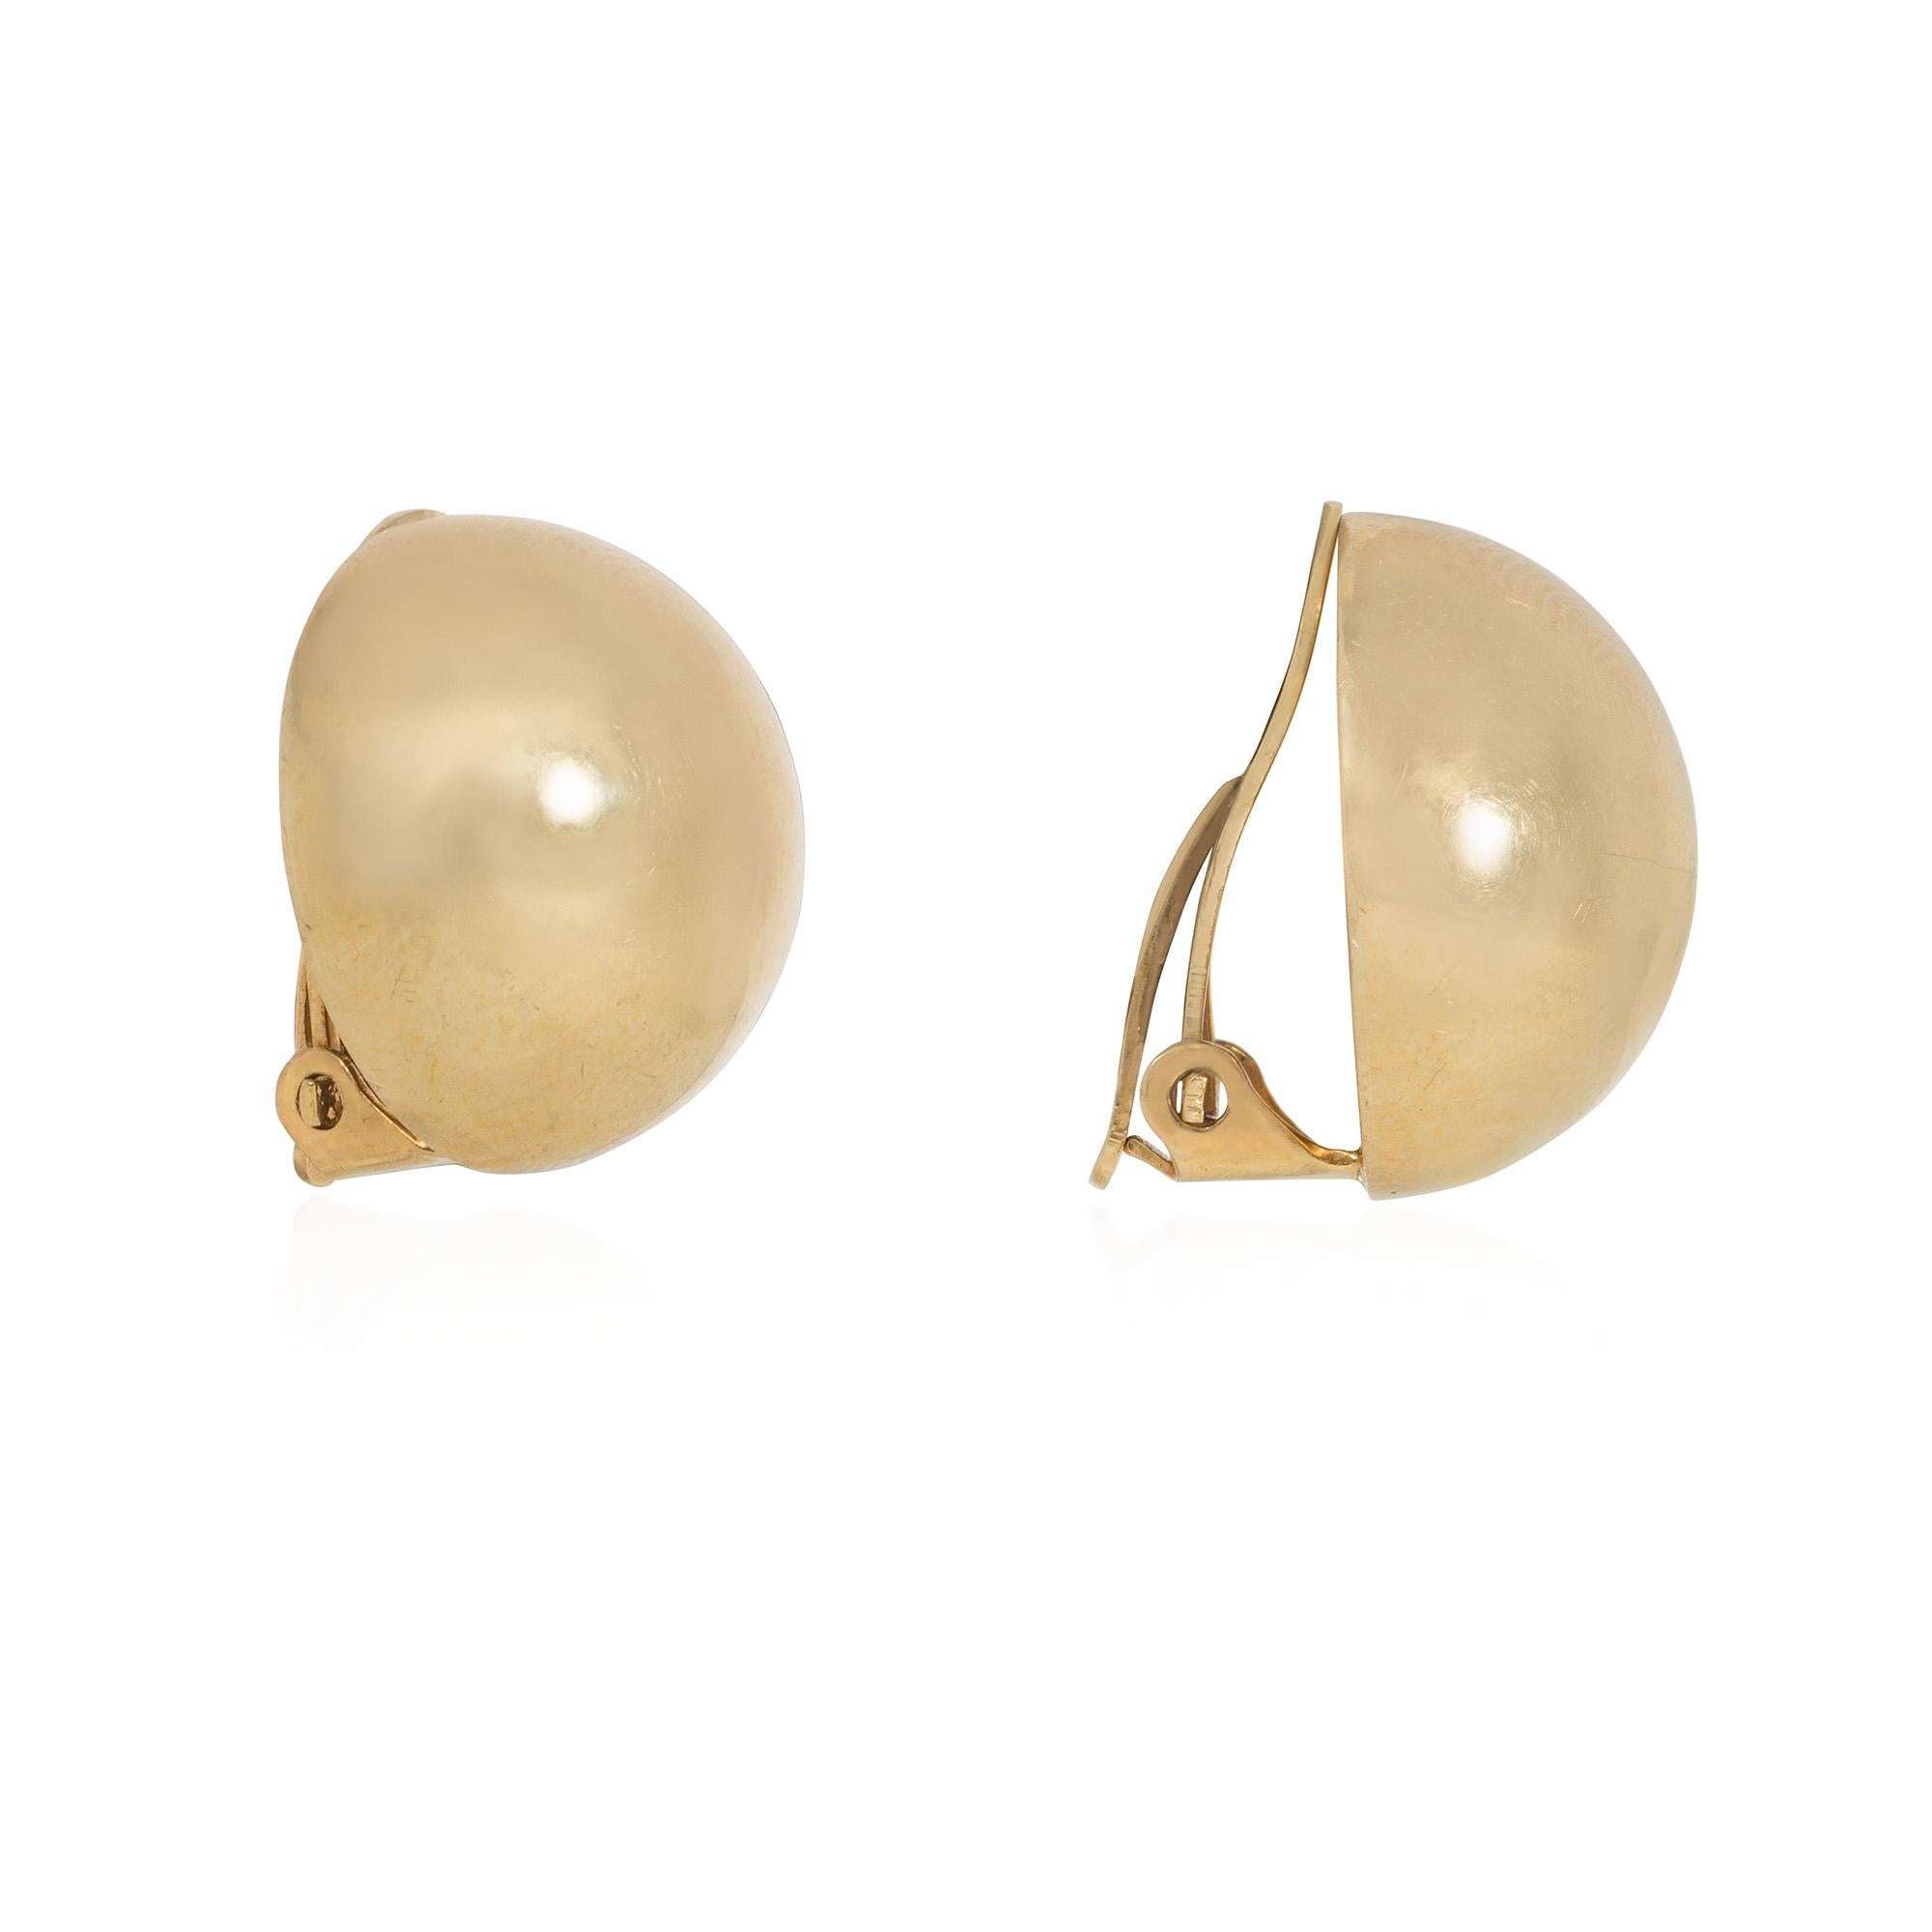 A pair of Retro gold button earrings of domed design with clip backs, in 14k. Tiffany & Co.  A classic, tailored look that never goes out of style!


